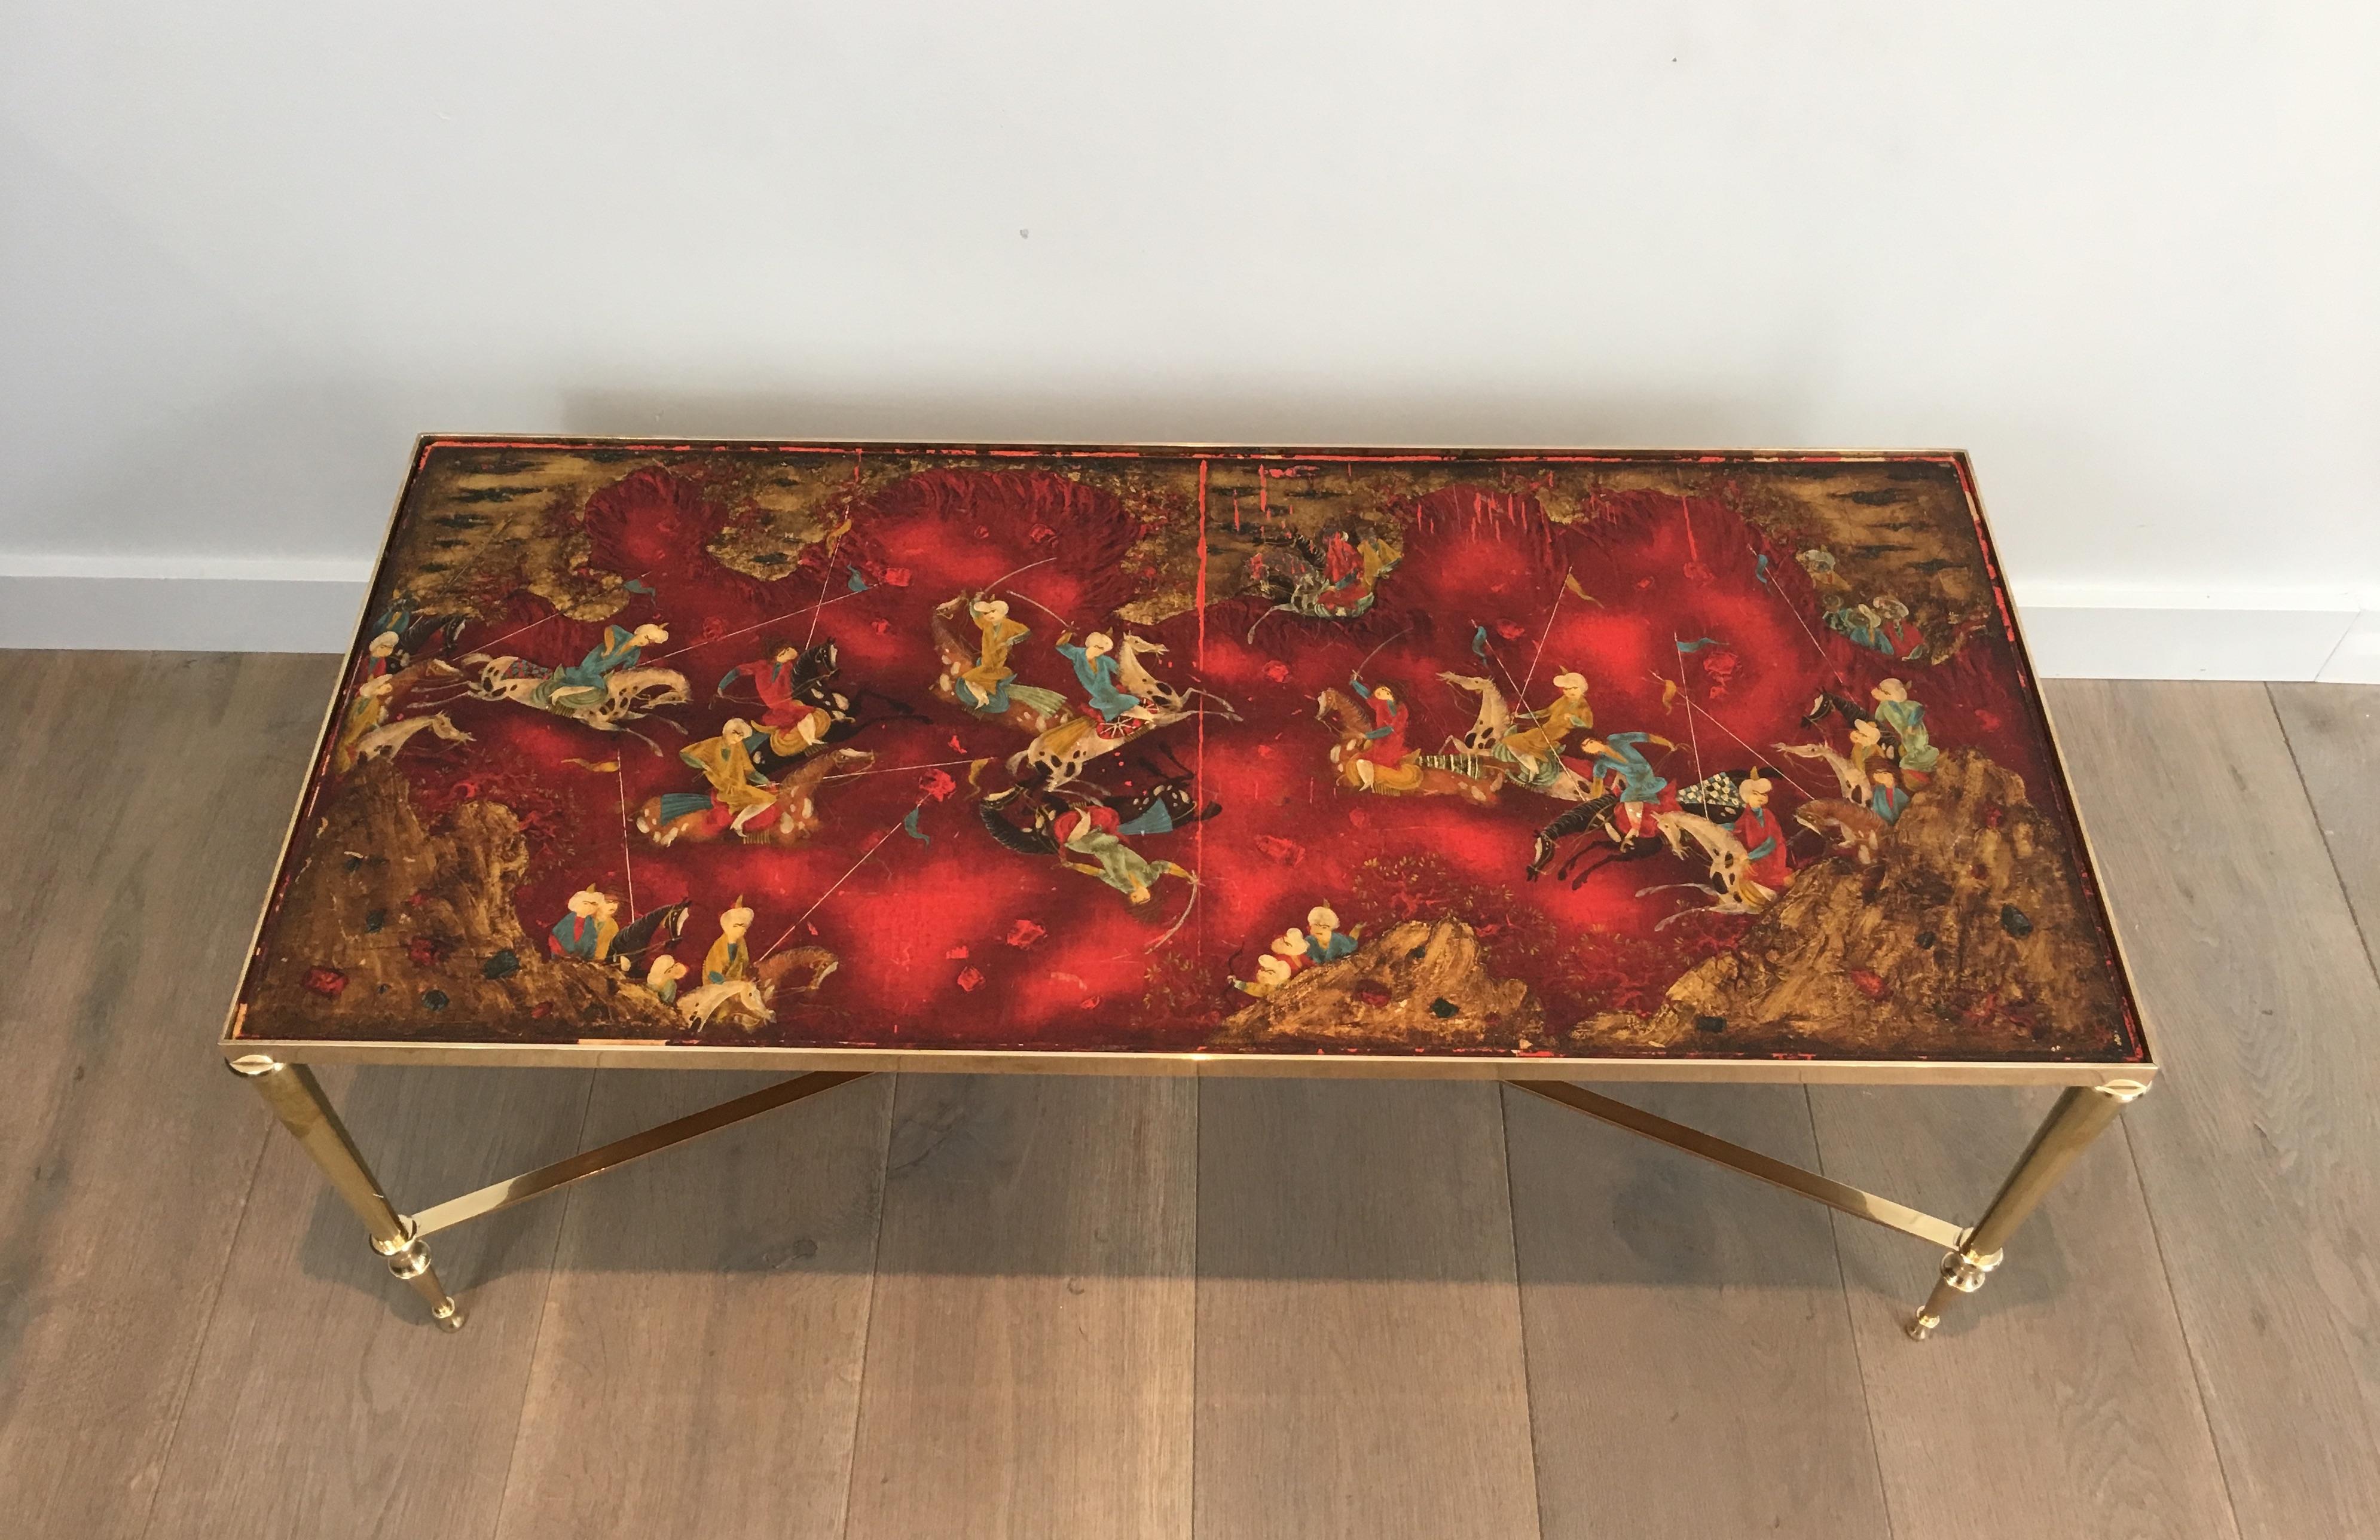 Attributed to Maison Jansen. Unique neoclassical brass coffee table with lacquered panel. The brass base has a nice brace. The lacquered panel shows a battle with Persian riders. French, circa 1940
The lacquer is a bit damaged and can have some